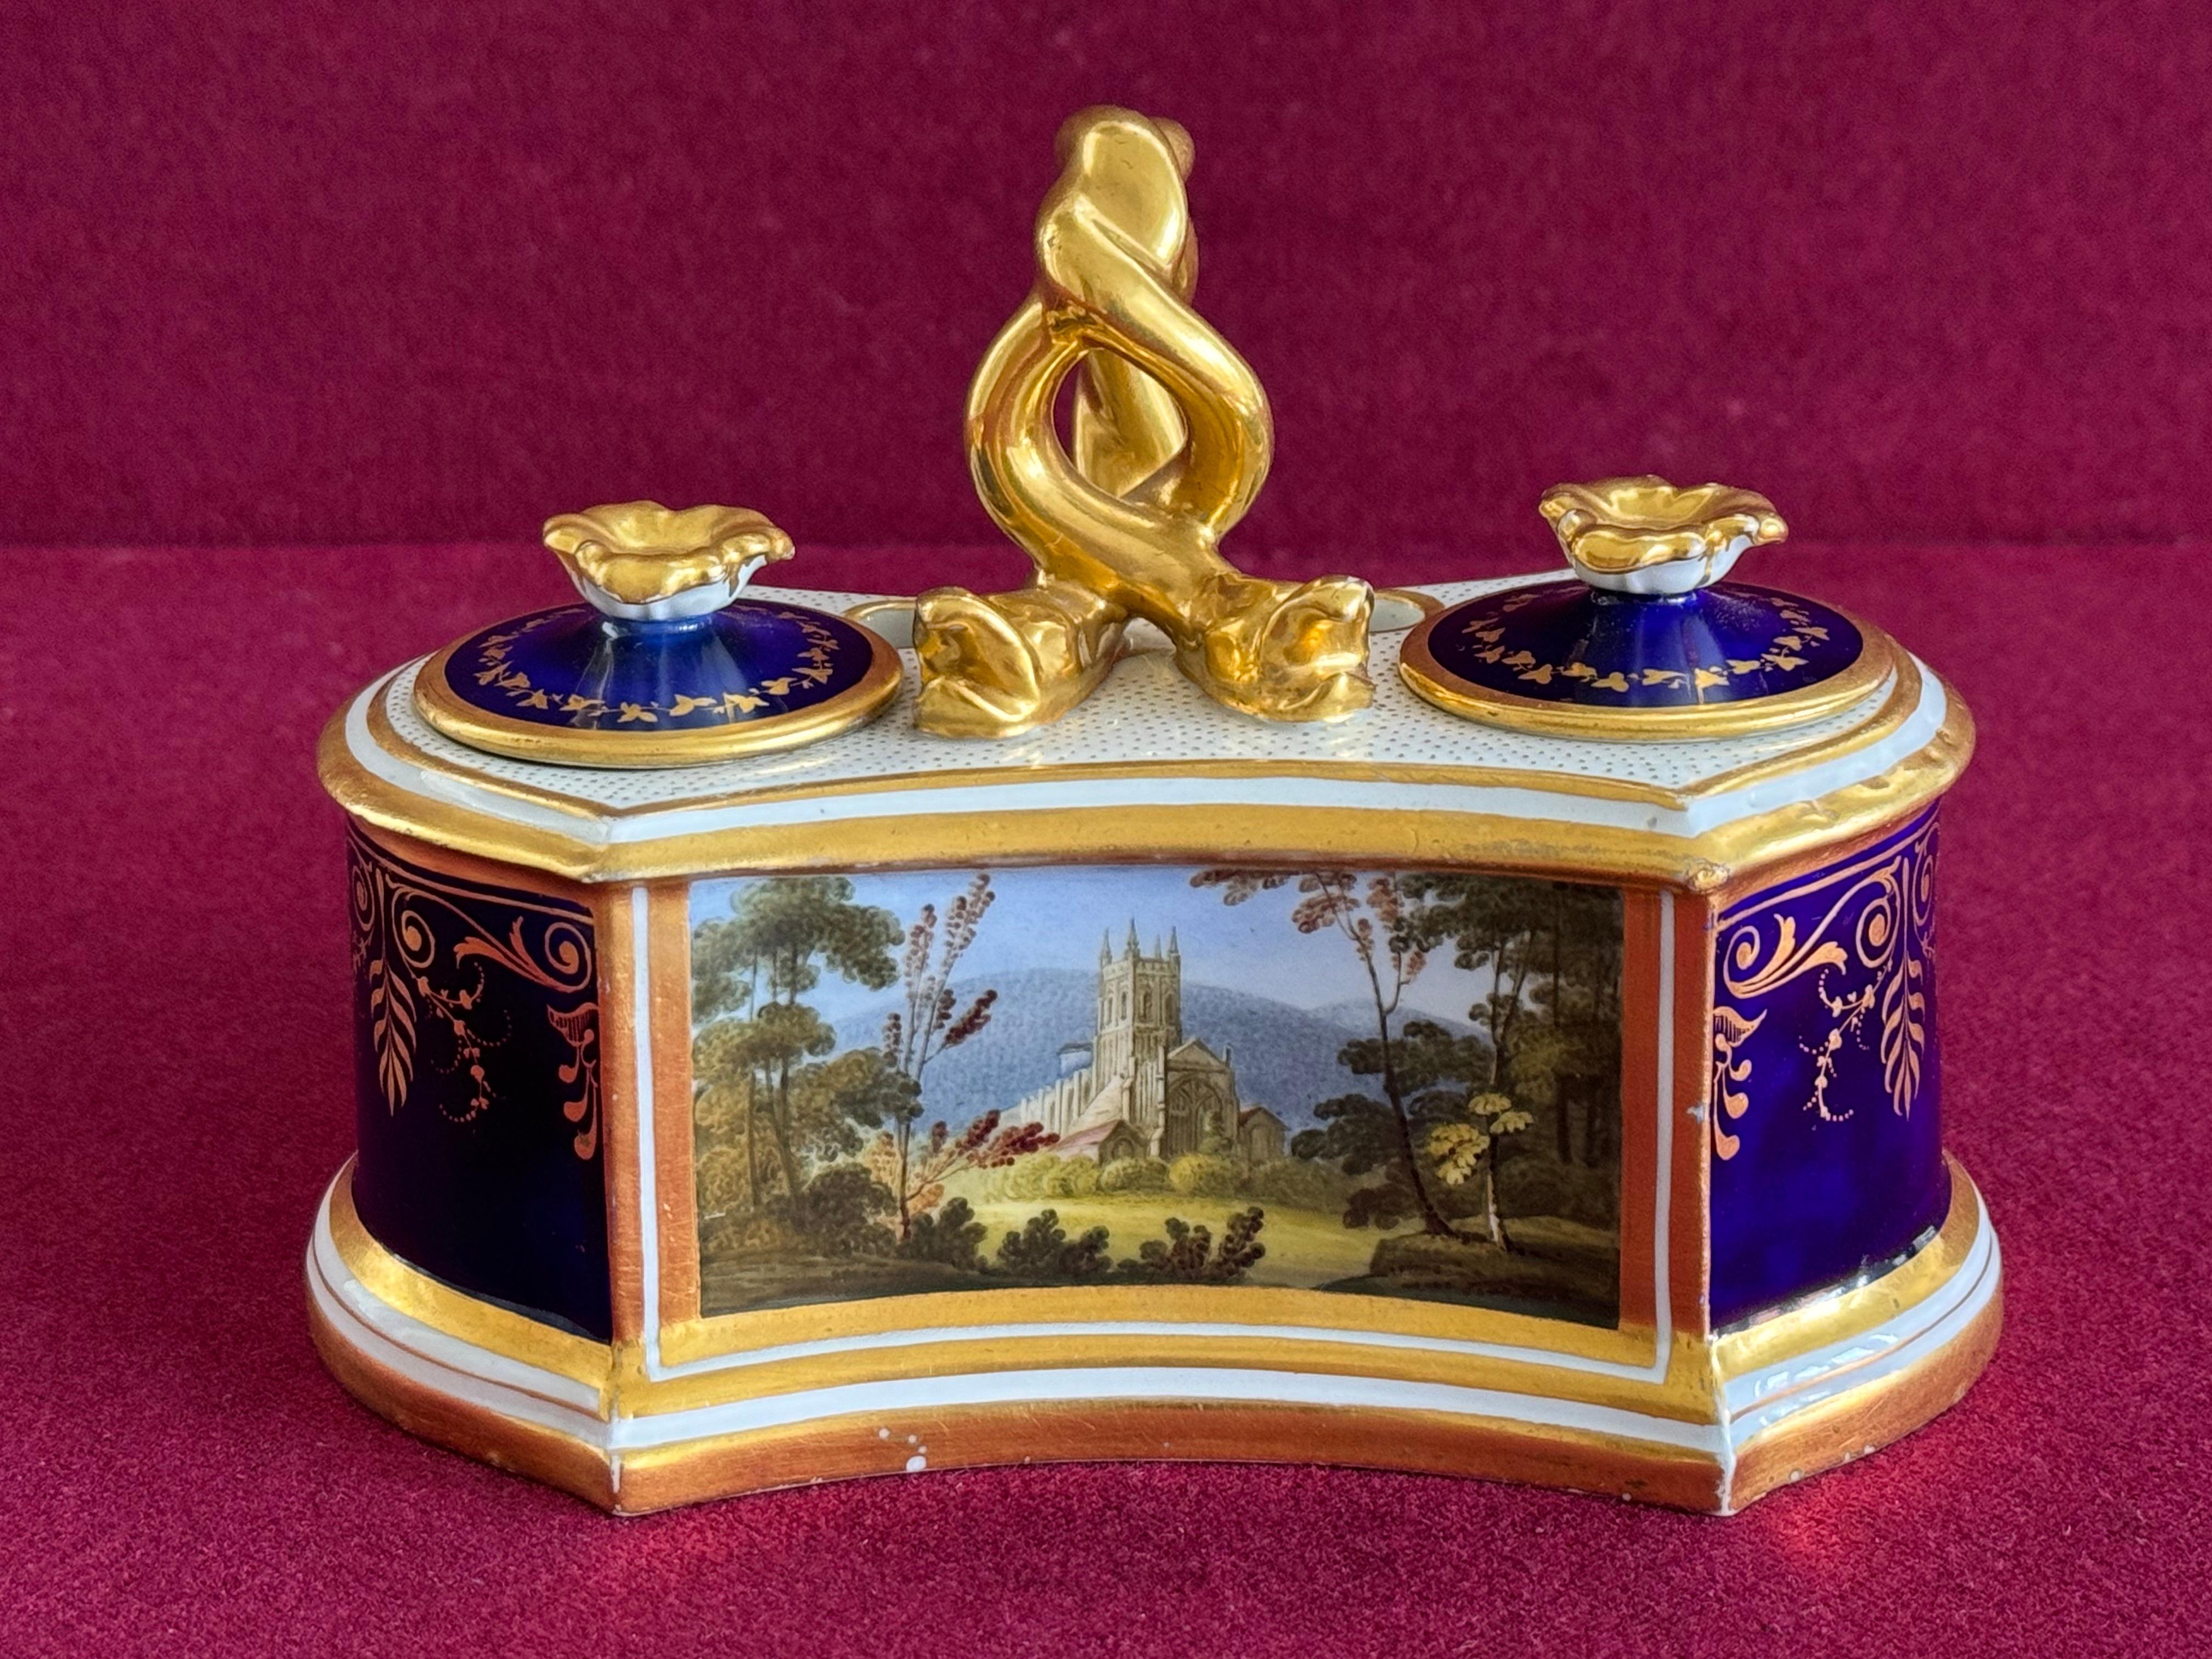 A Flight, Barr and Barr Worcester porcelain inkstand and two covers, c.1815-20. Two fixed inkwells divided by a gilt entwined serpent handle, a pair of quill-holders to the reverse, painted with a large titled panel of 'Malvern Abbey Church